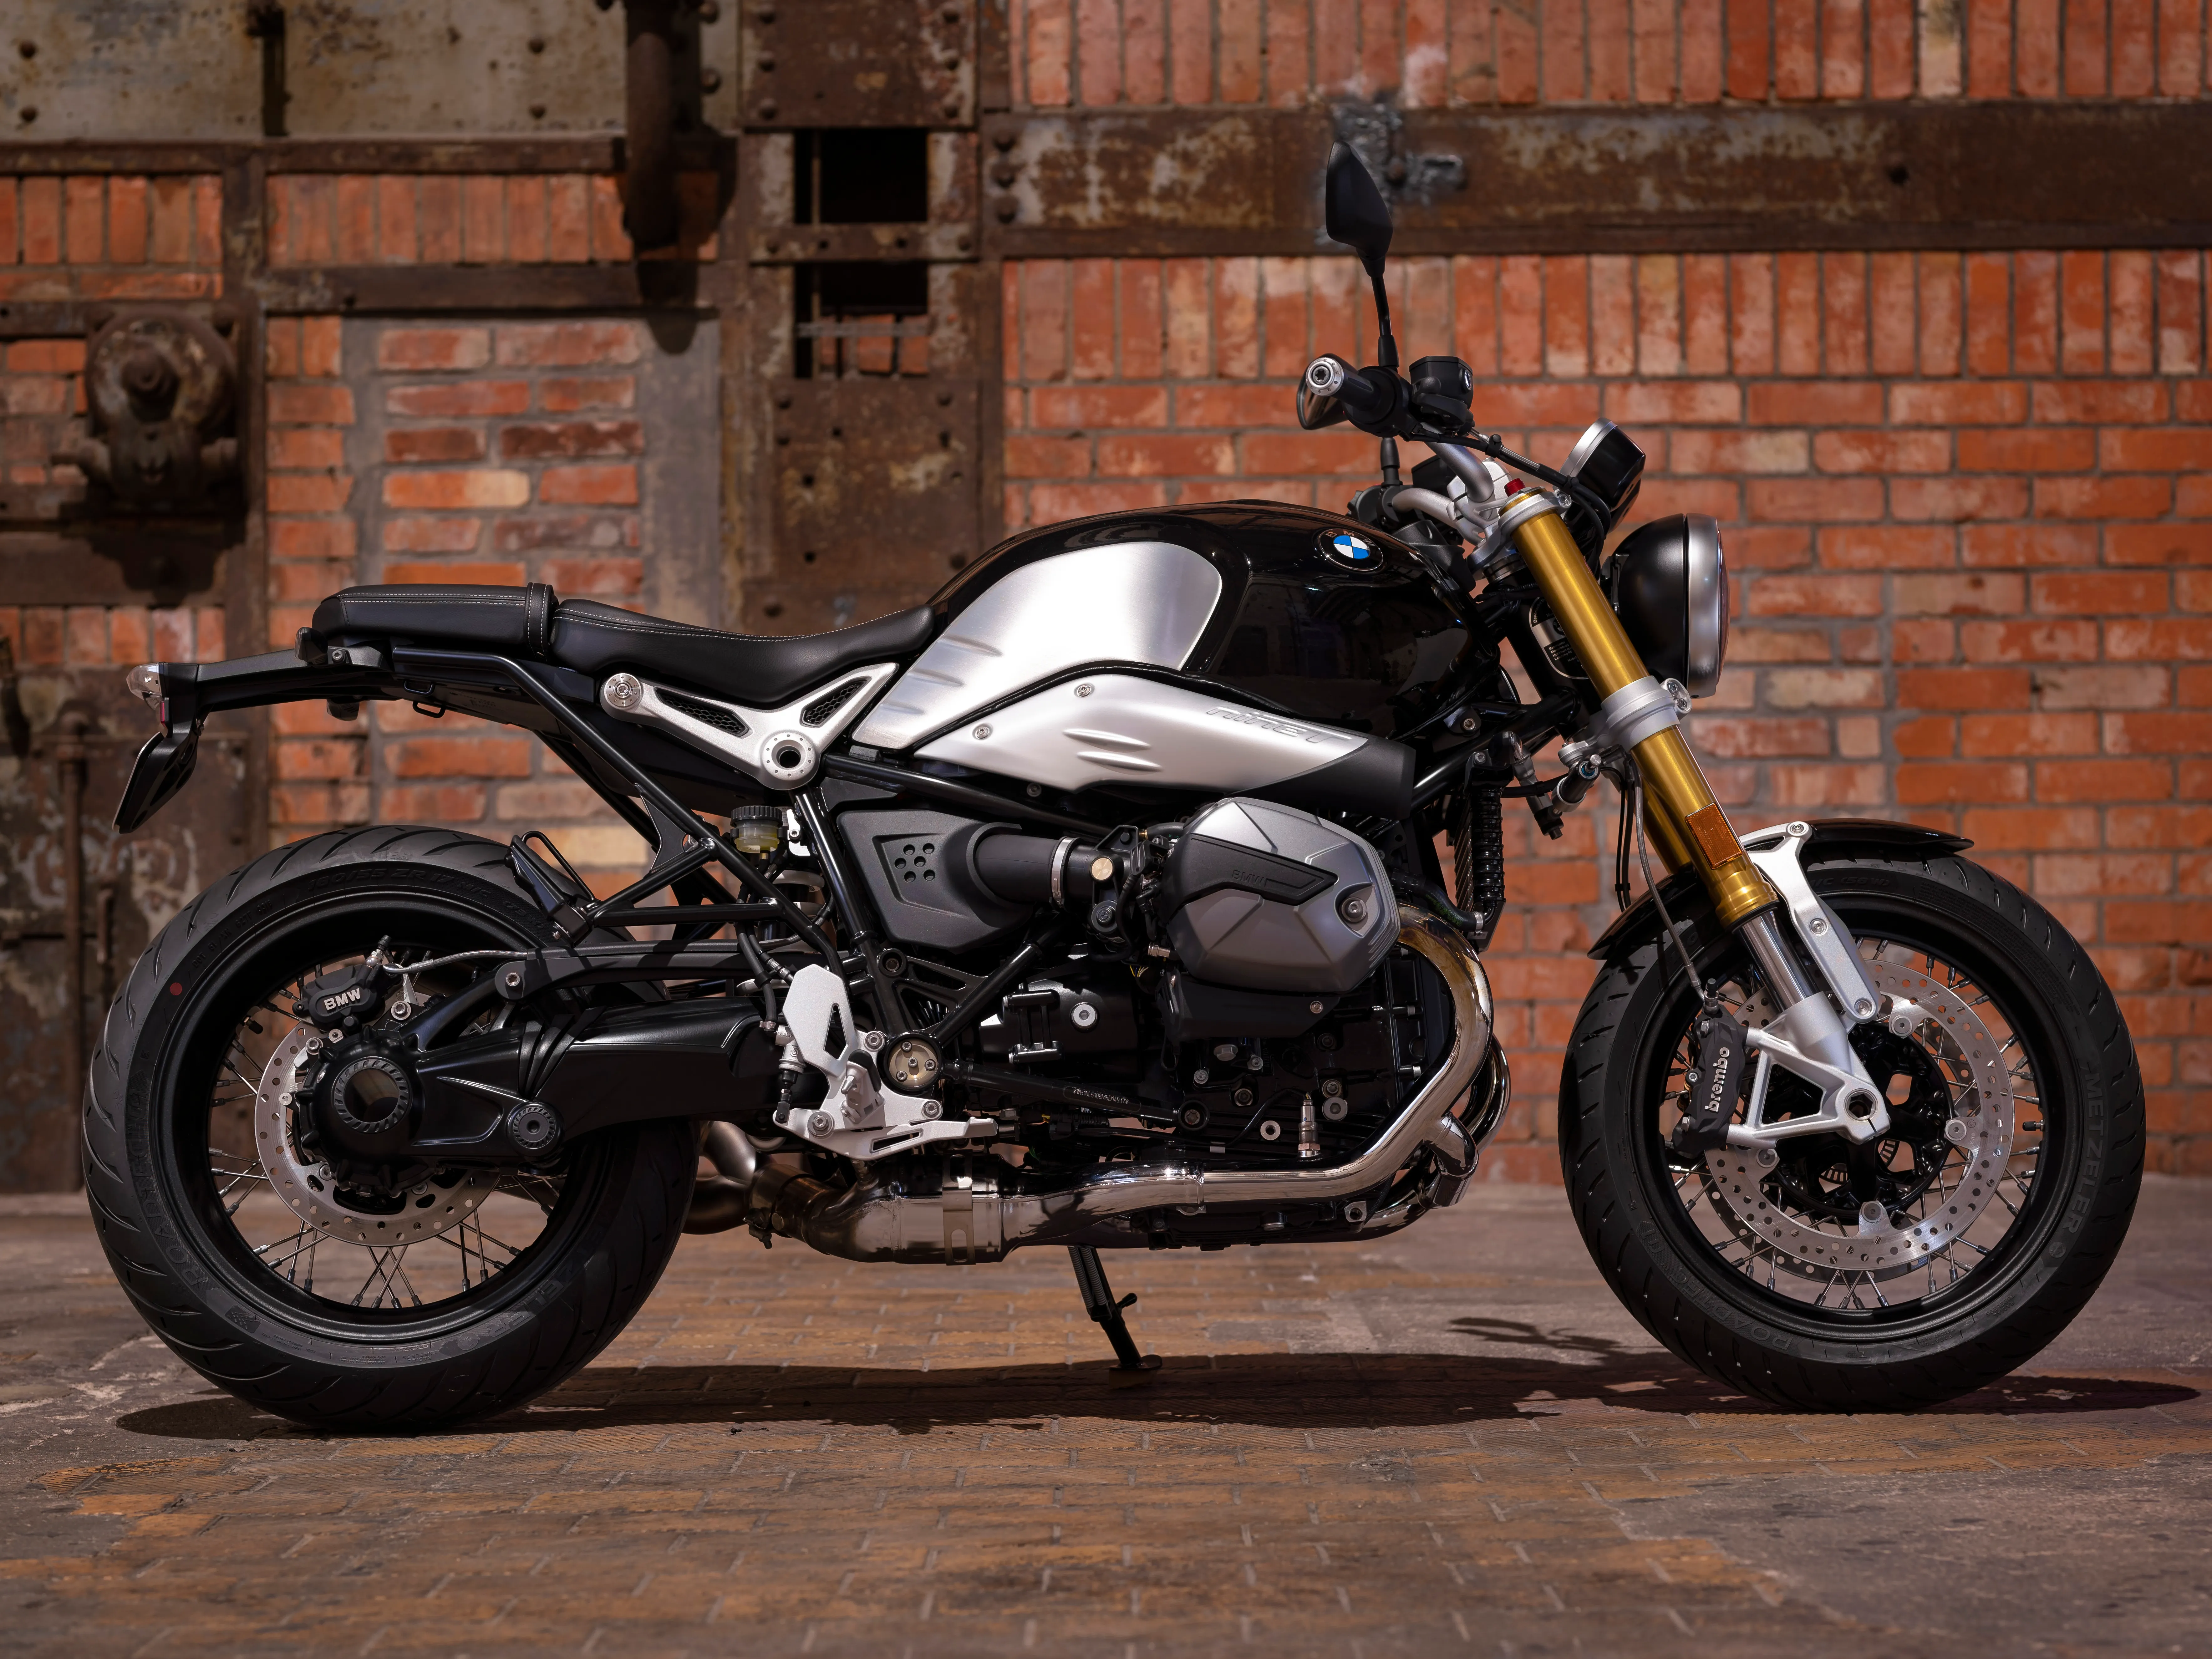 The R 12 nineT from BMW offers a classic look with modern technology